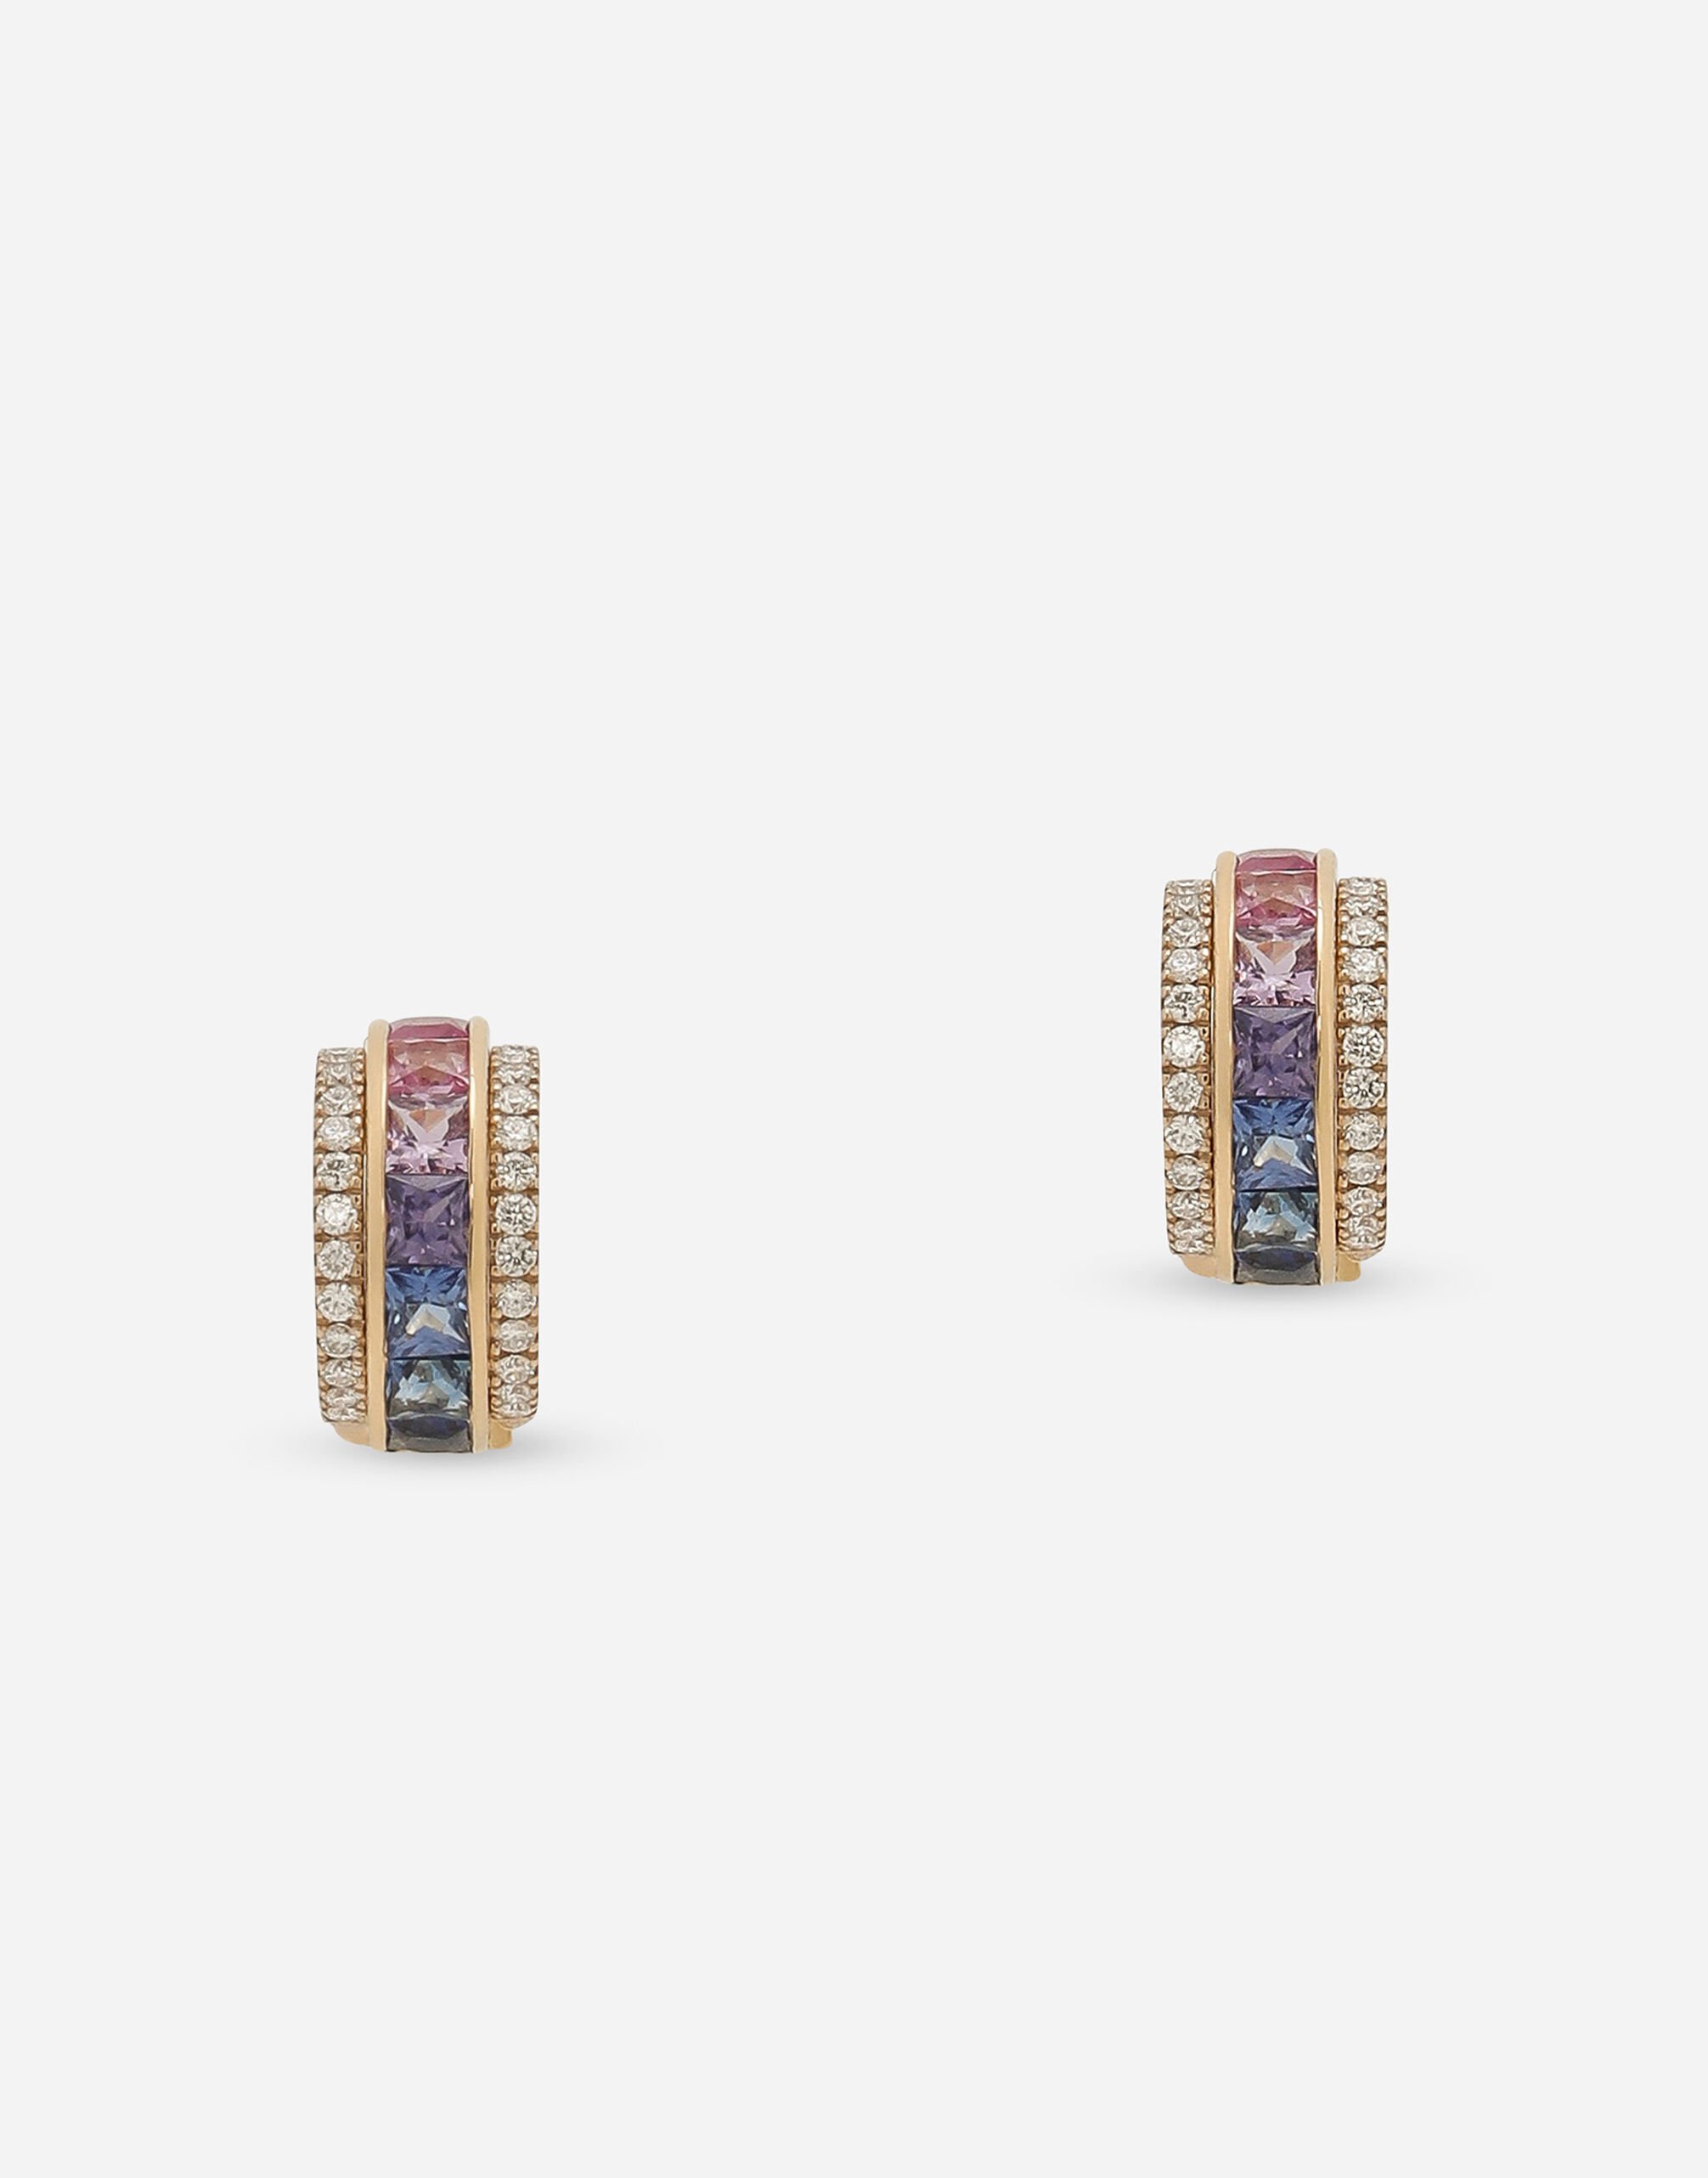 Dolce & Gabbana Rainbow earrings in yellow gold 18kt with multicolor sapphires and diamonds Gold WAMR1GWMIX1